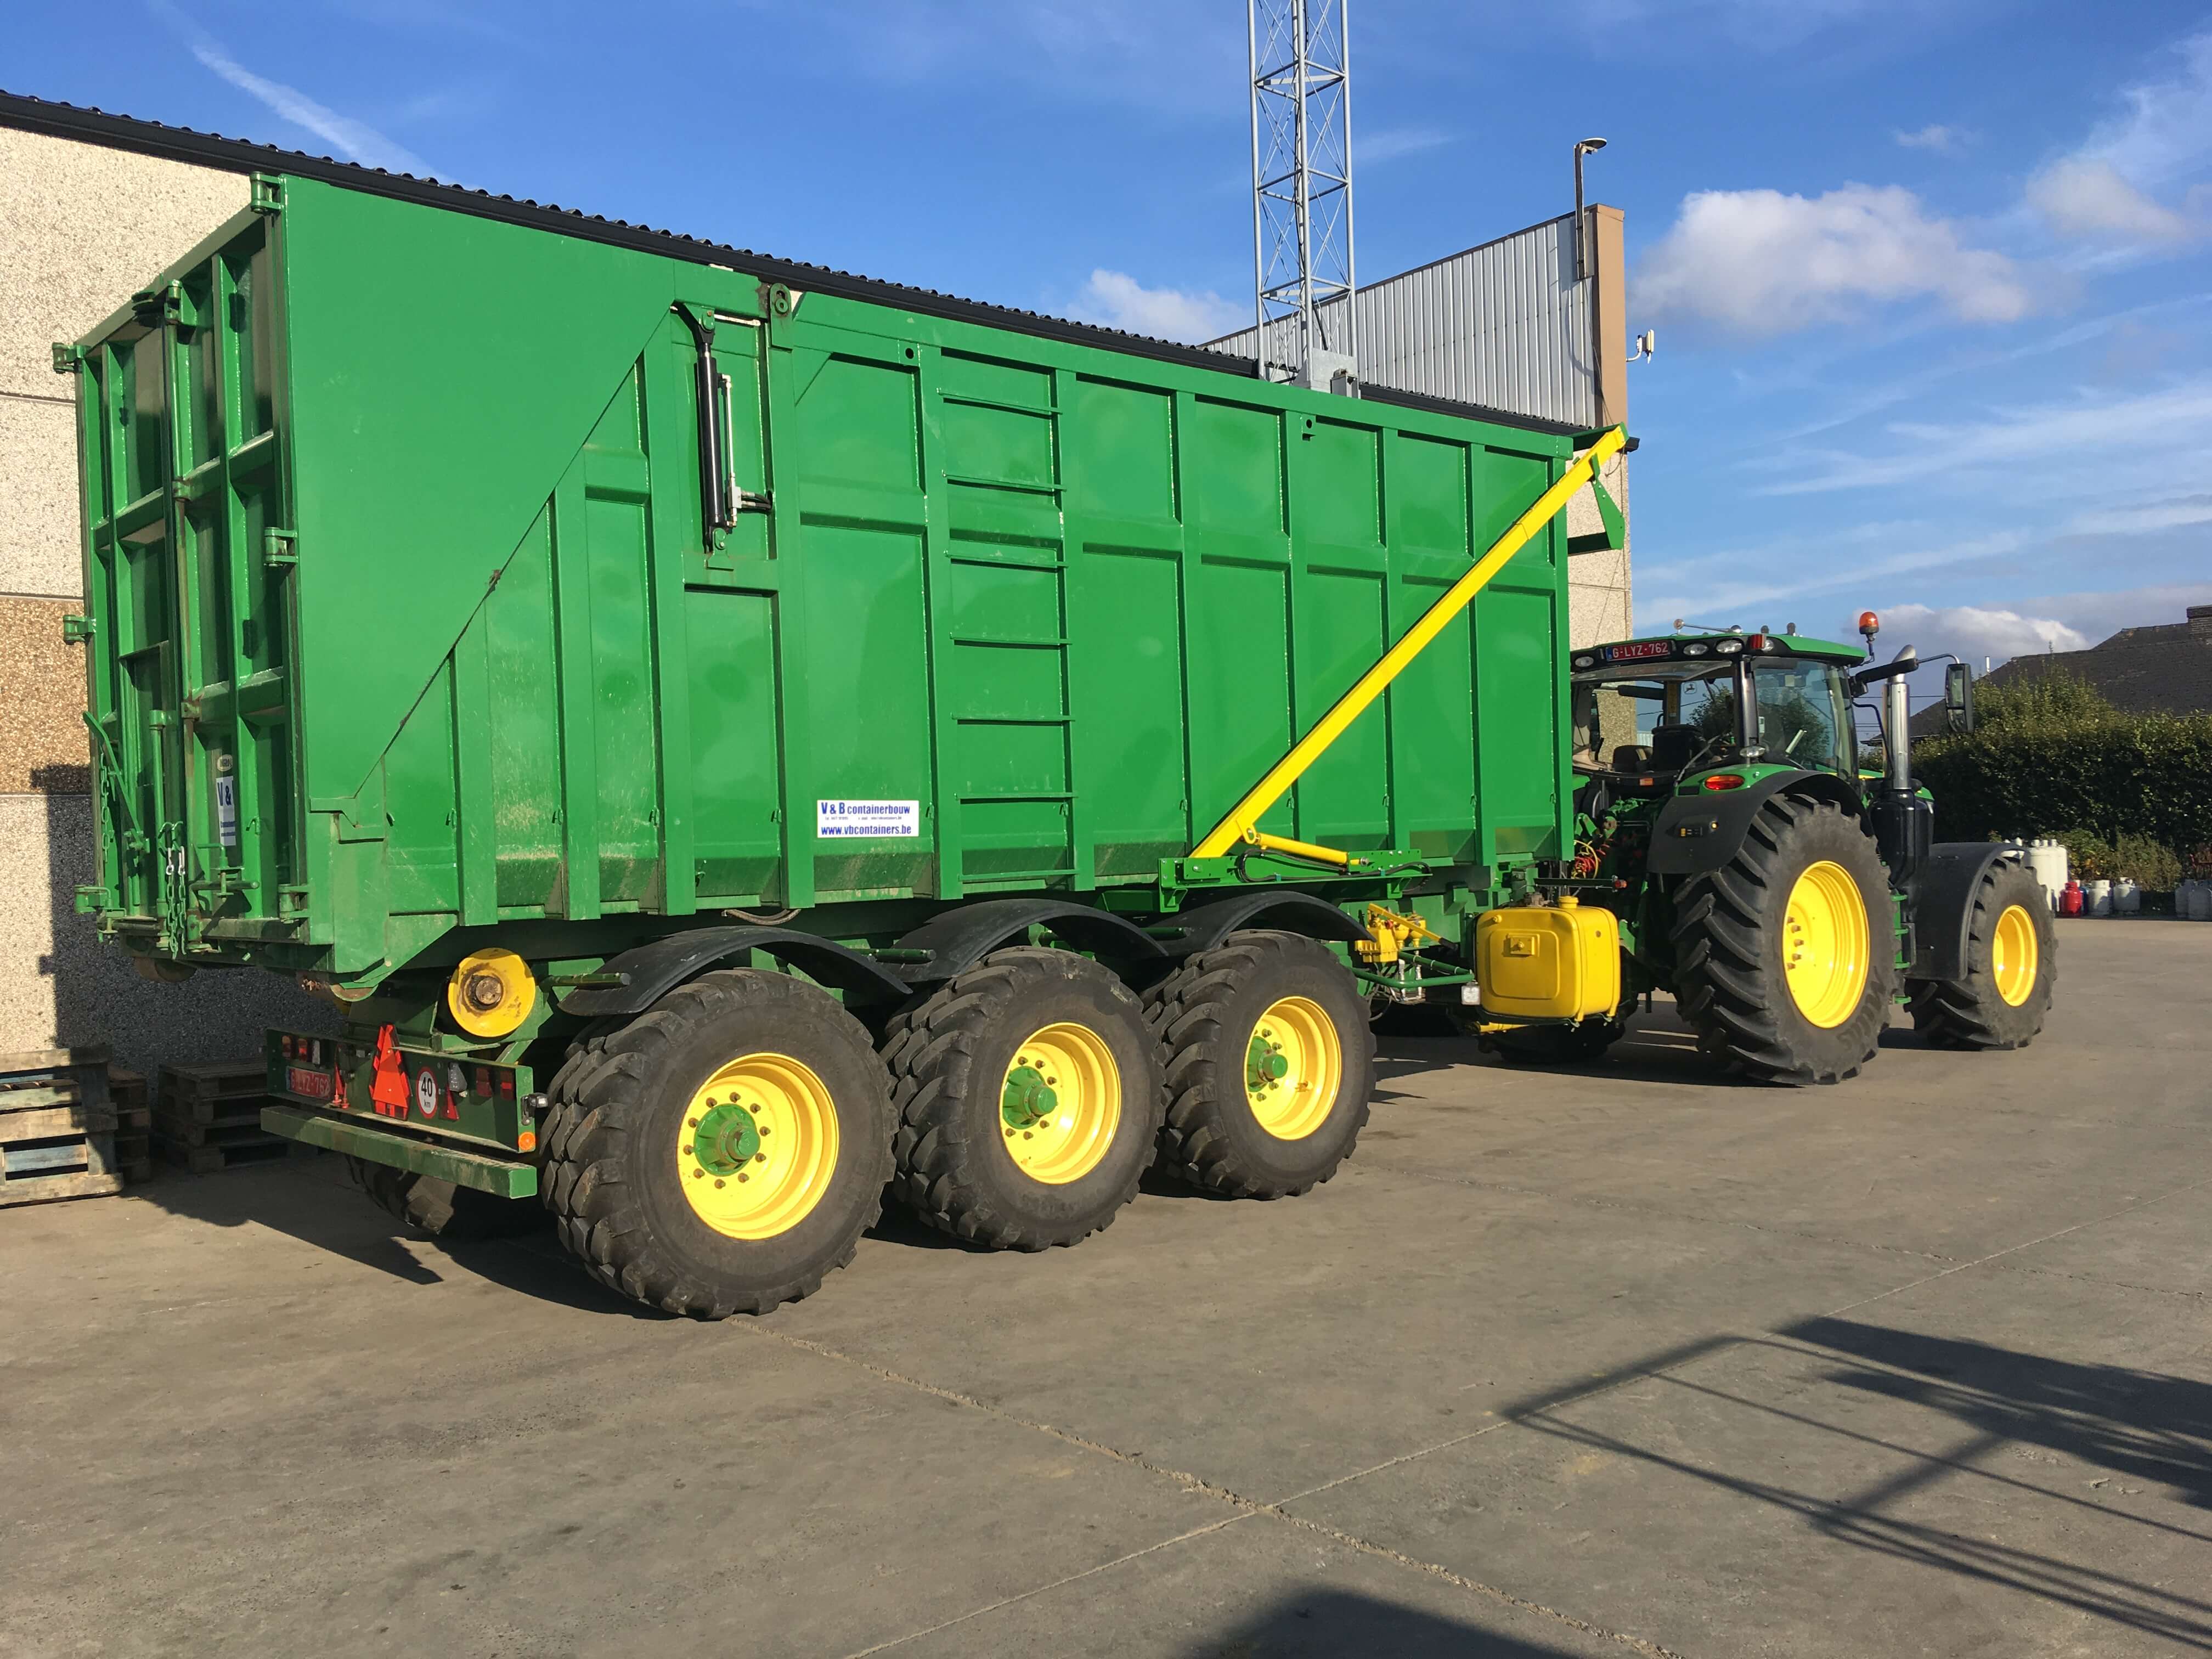 large green cargo box attached to tractor